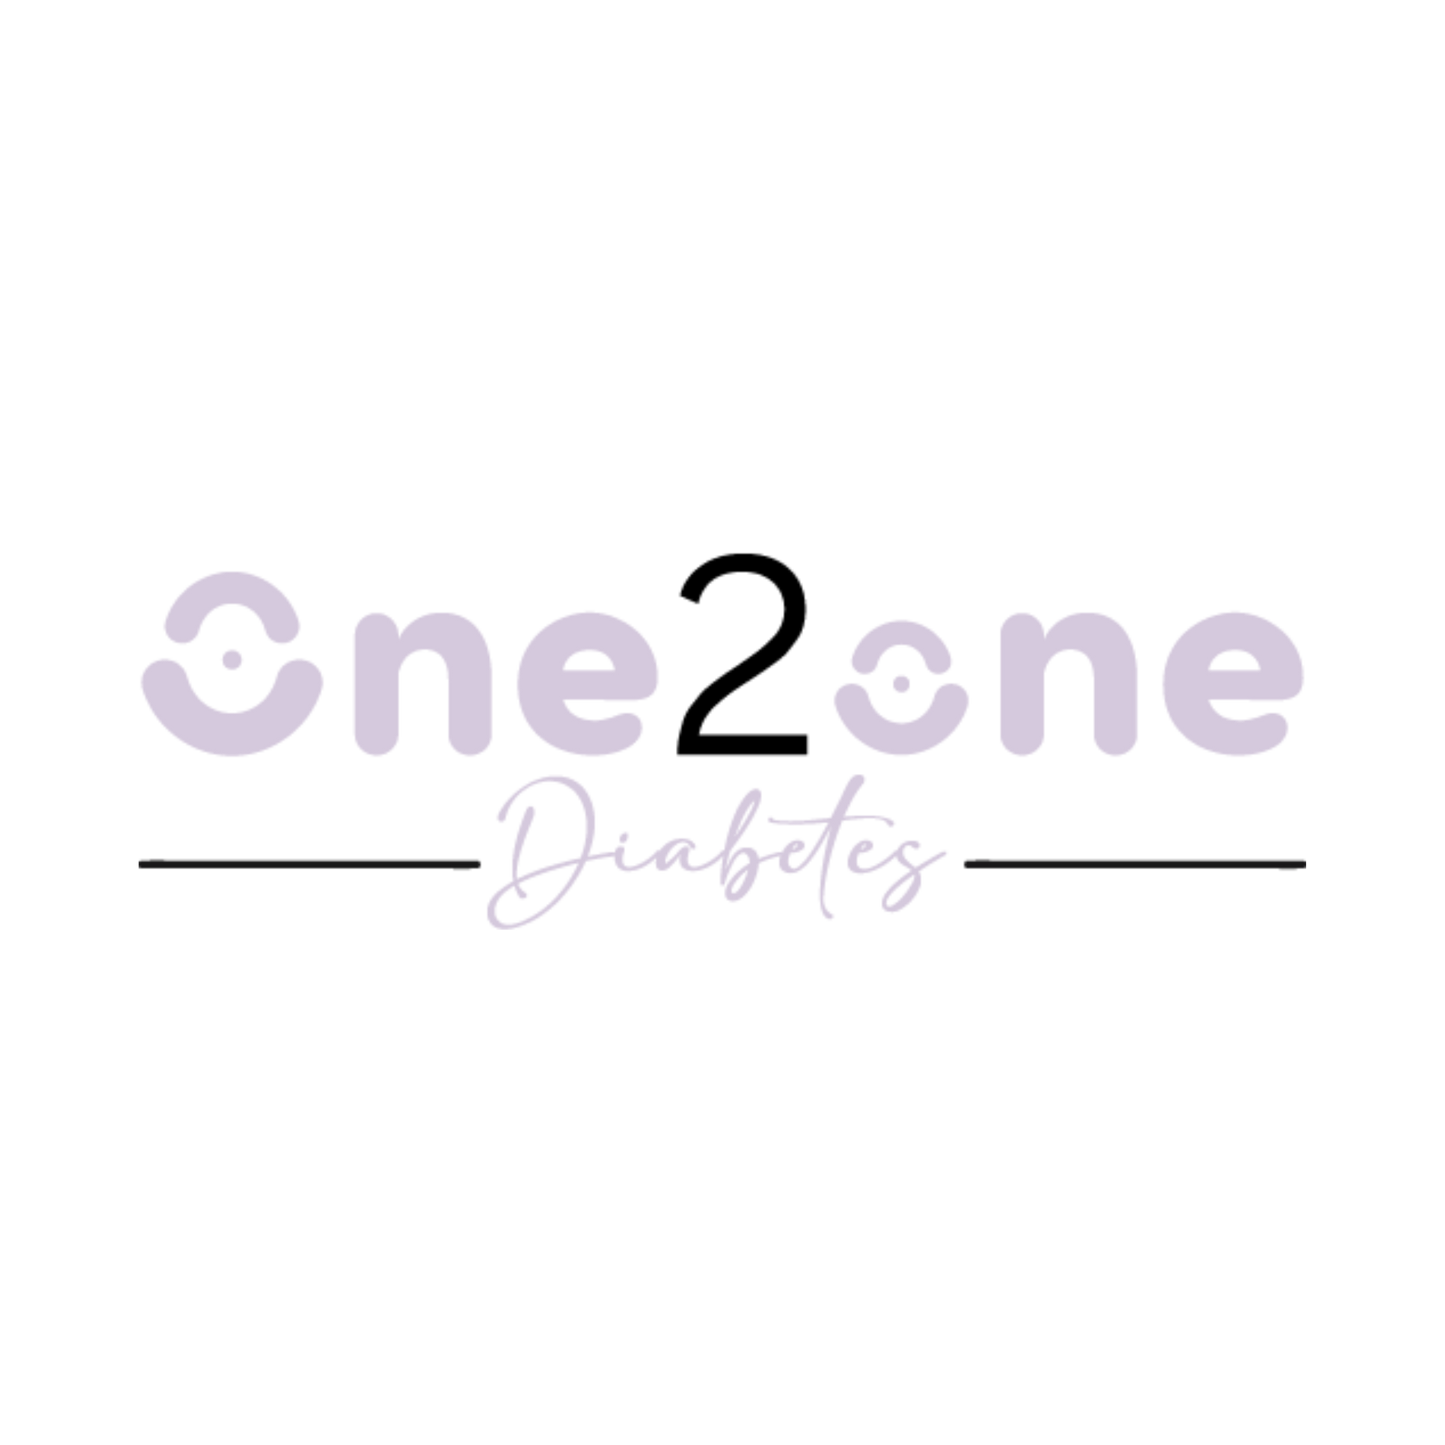 One2One Diabetes logo in lavender fog with a transparent background